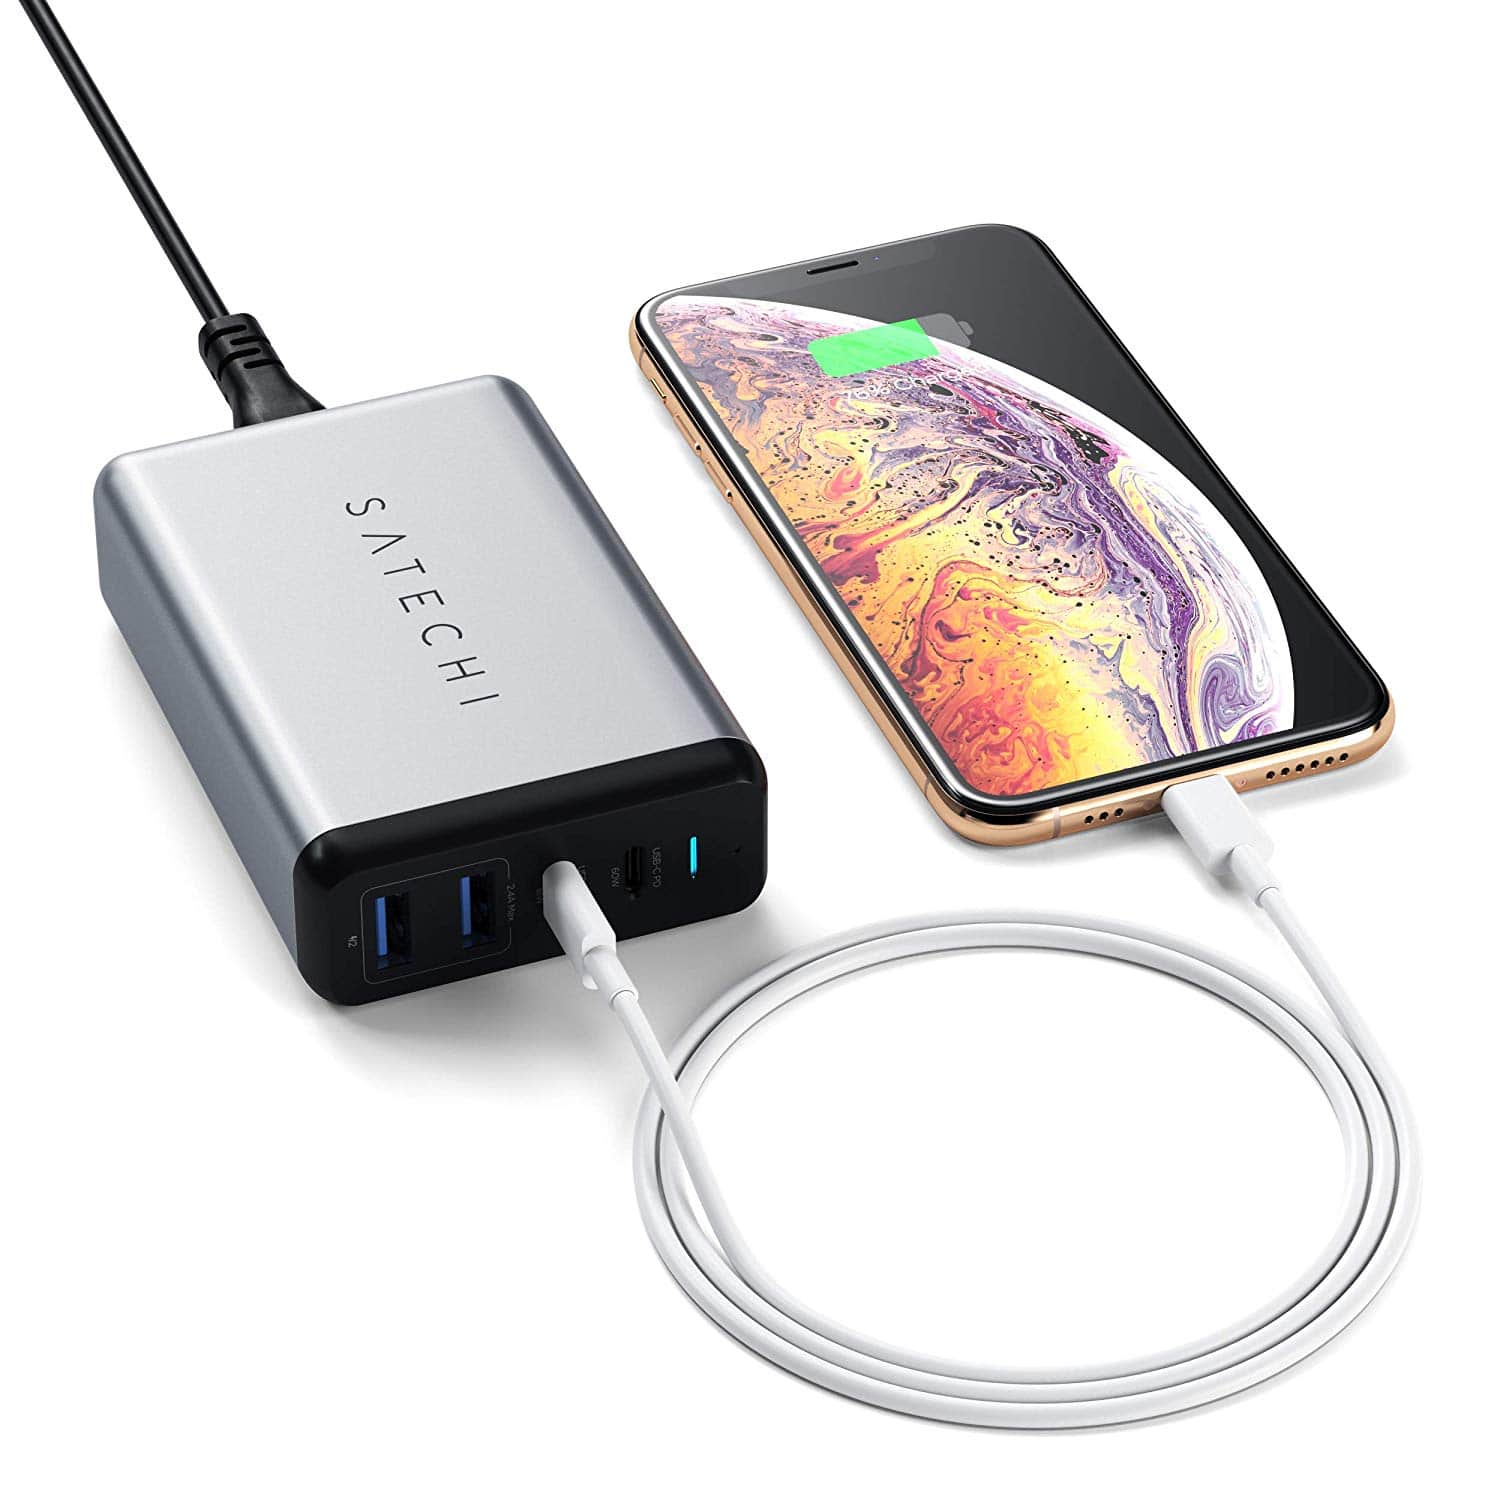 photo of Satechi launches a pair of elegant USB-C power delivery travel chargers image